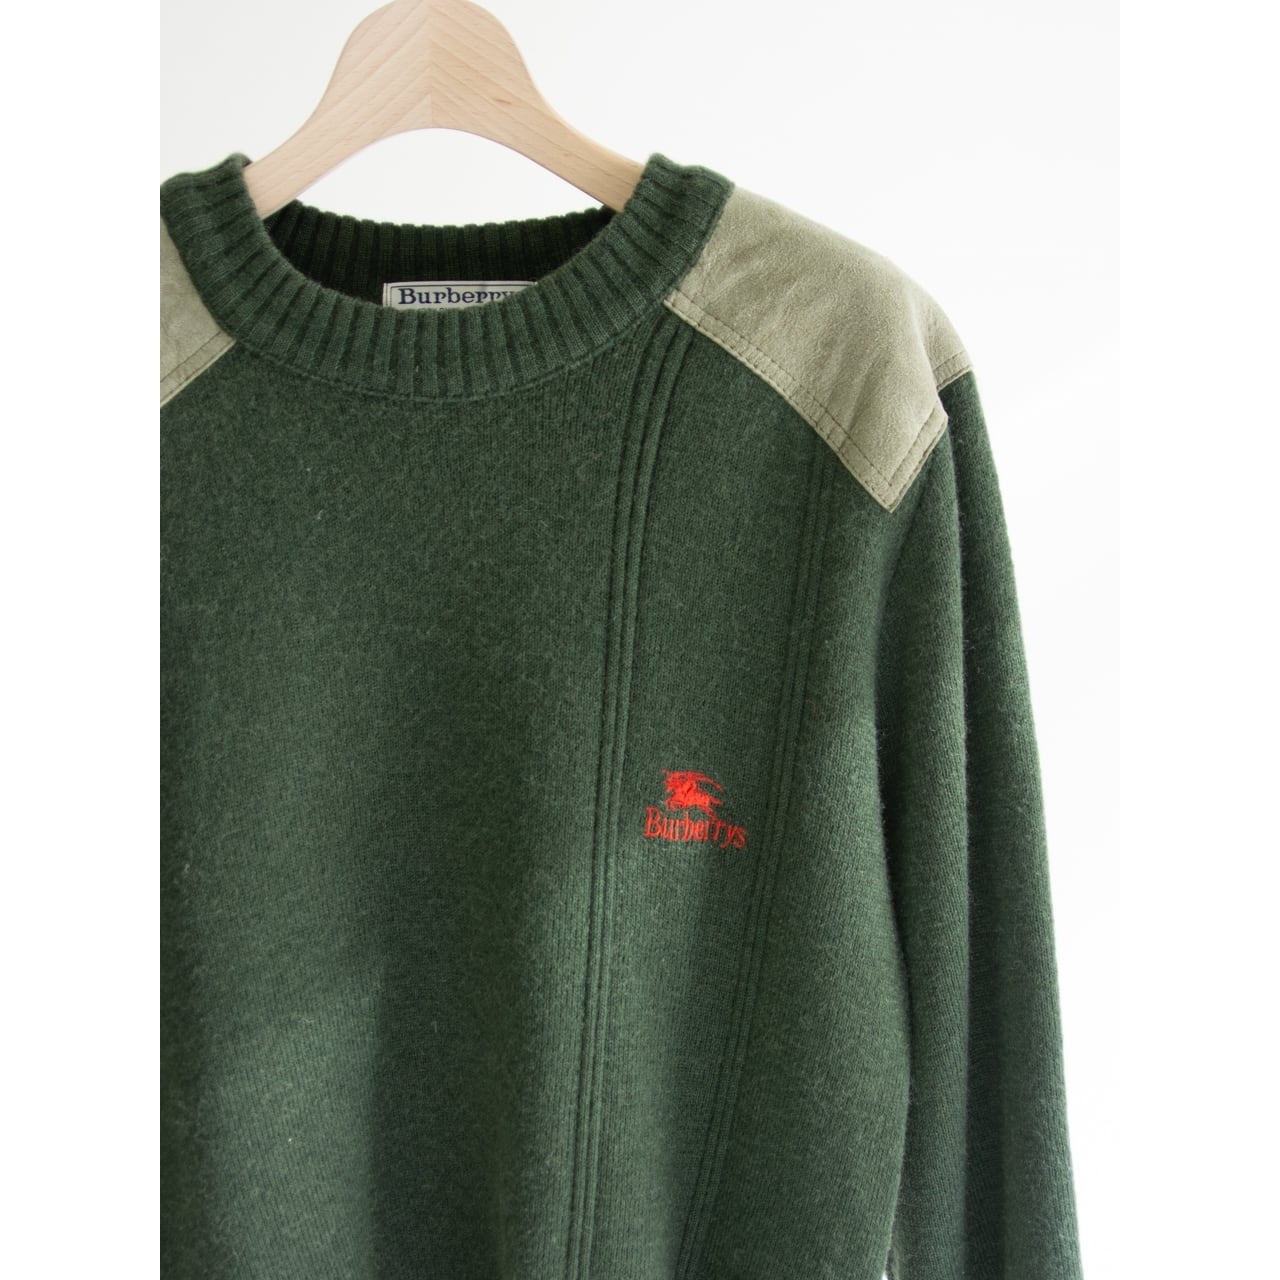 Burberrys】Made in England 80-90s 100% Wool Commando Sweater